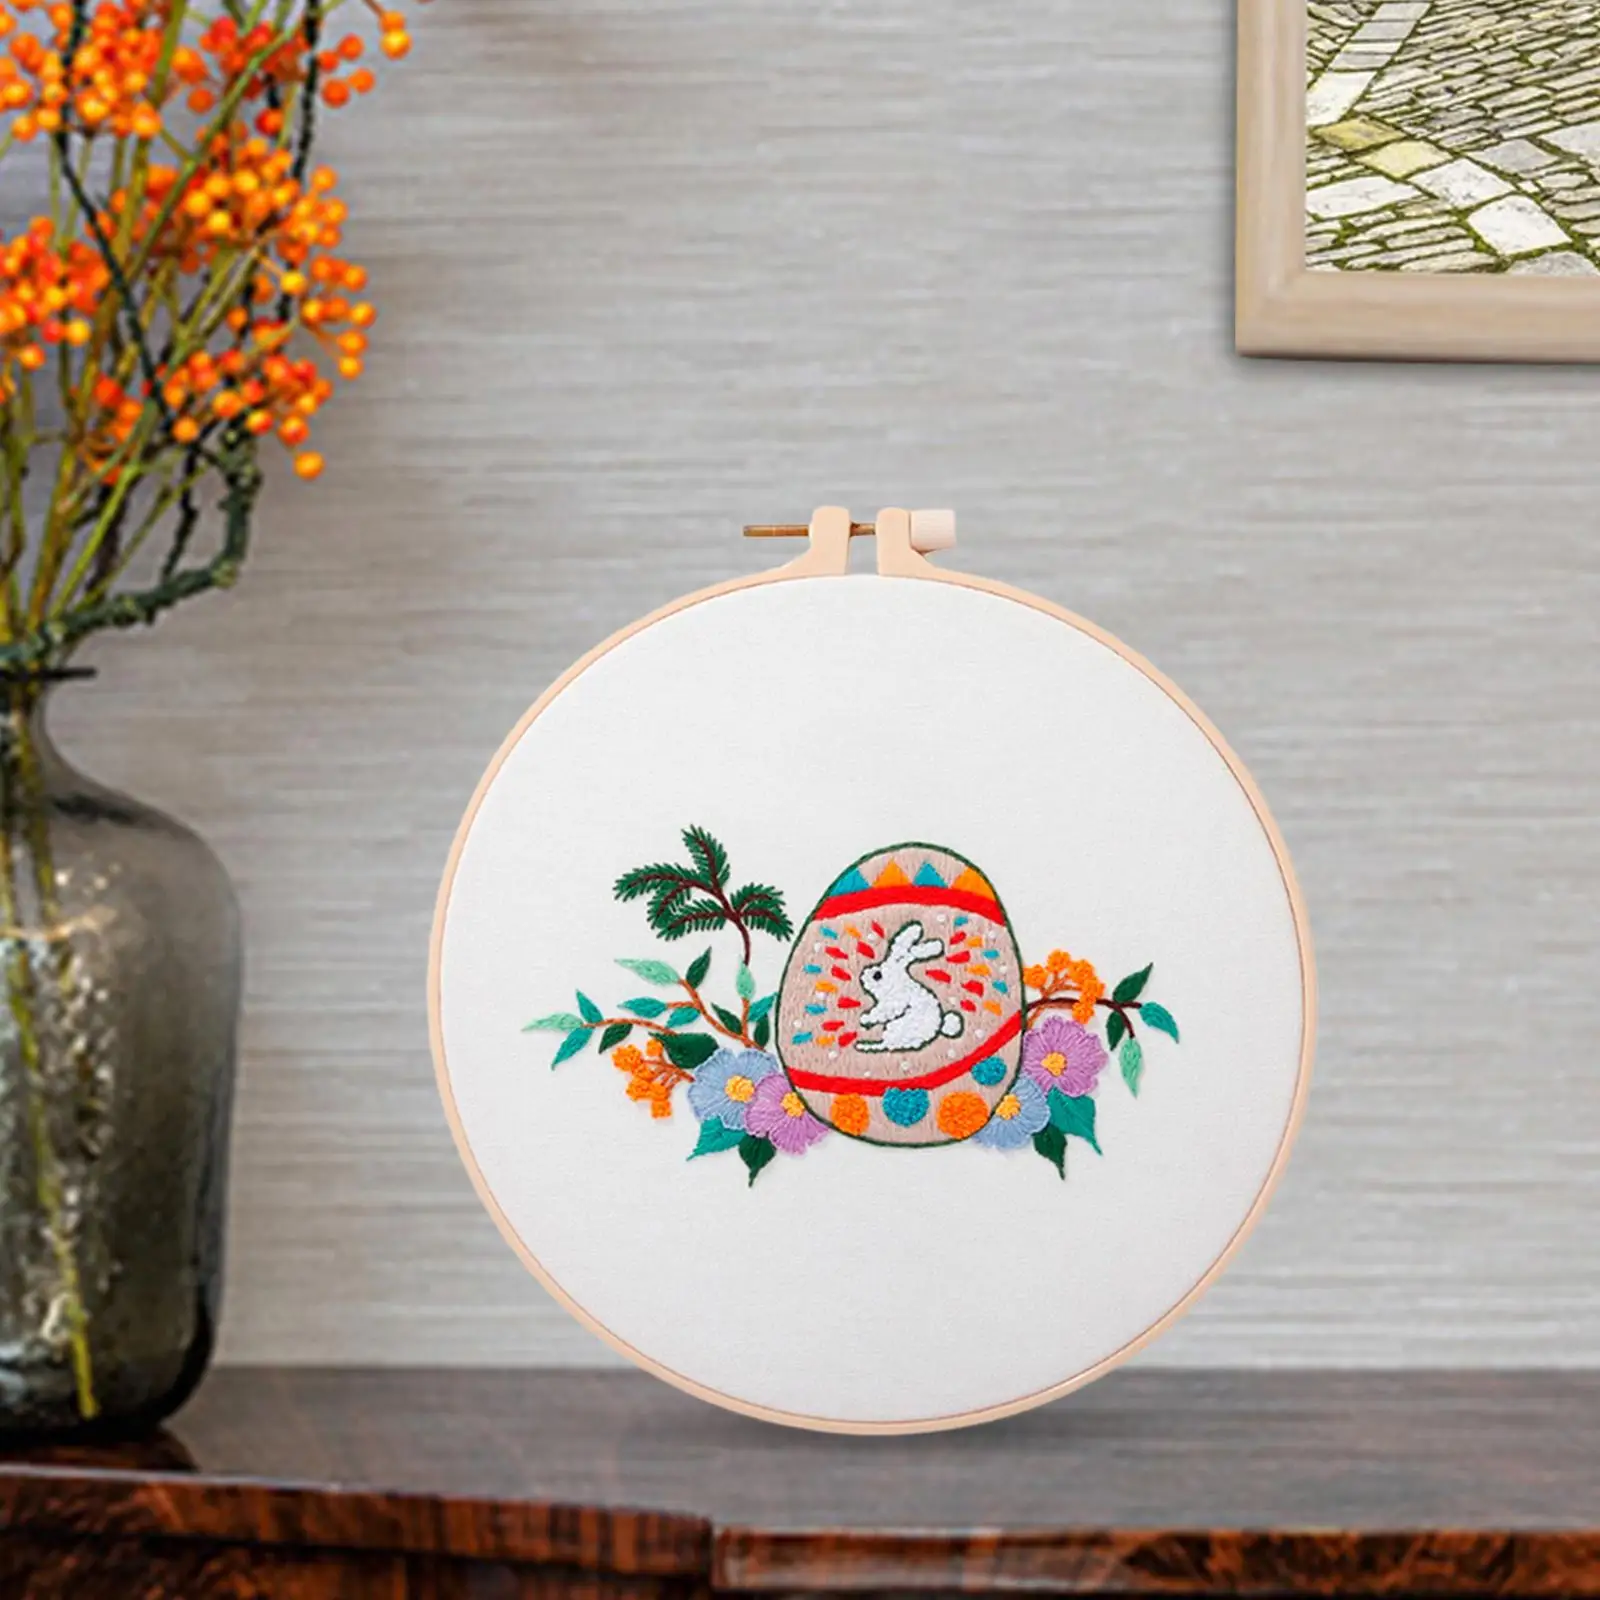 Rabbit Pattern Embroidery Starter Embroidery Hoop for Adults Sewing Handmade Easter DIY Cross Stitch Crafts Accessories